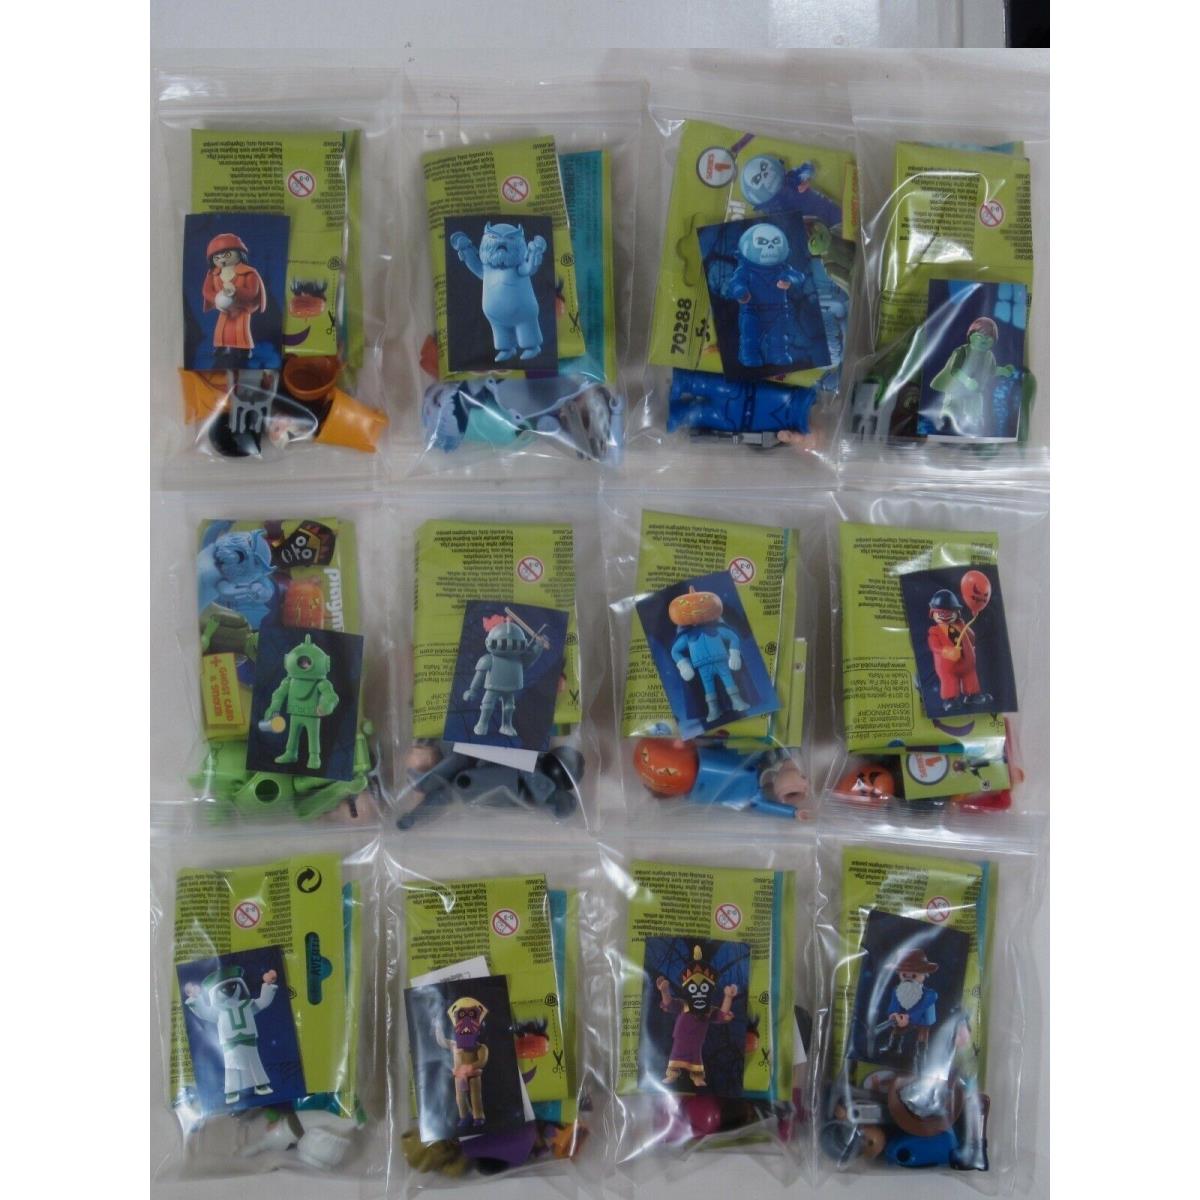 Playmobil Scooby-doo Ghosts Complete Set of 12 Series 1 Mystery Figures 2019